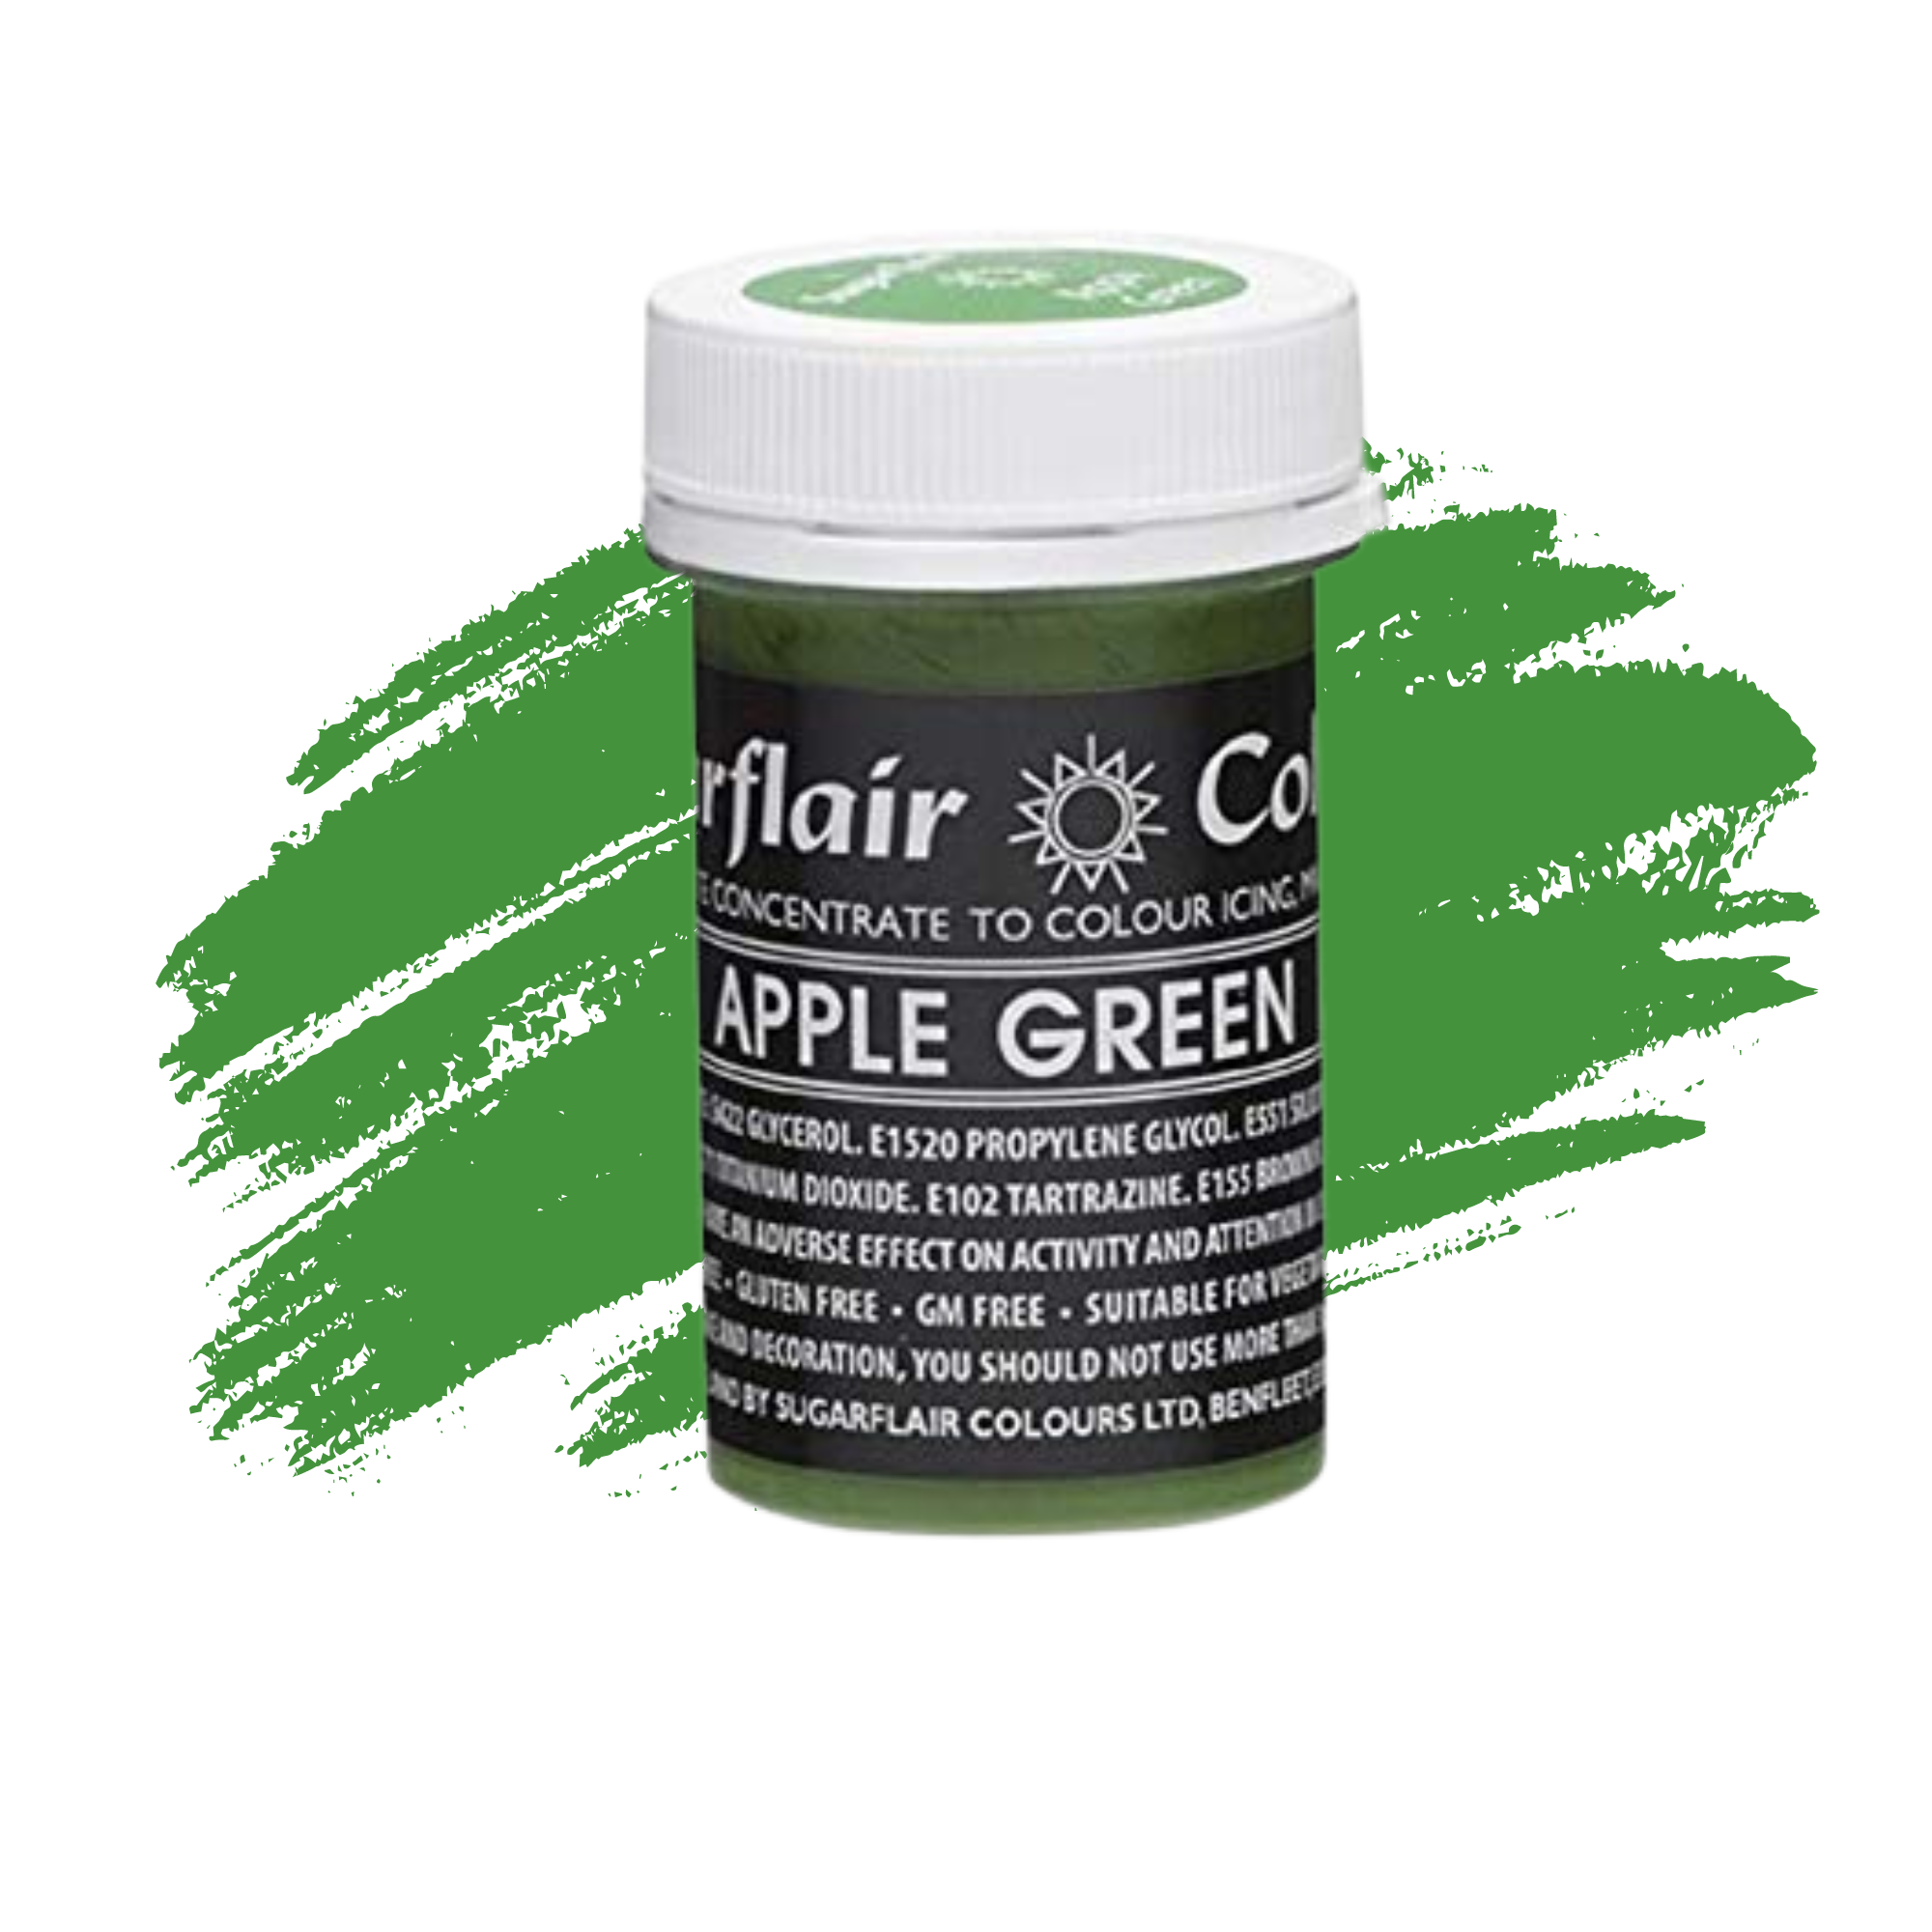 Sugarflair Paste Colours Concentrated Food Colouring - Pastel Apple Green - 25g